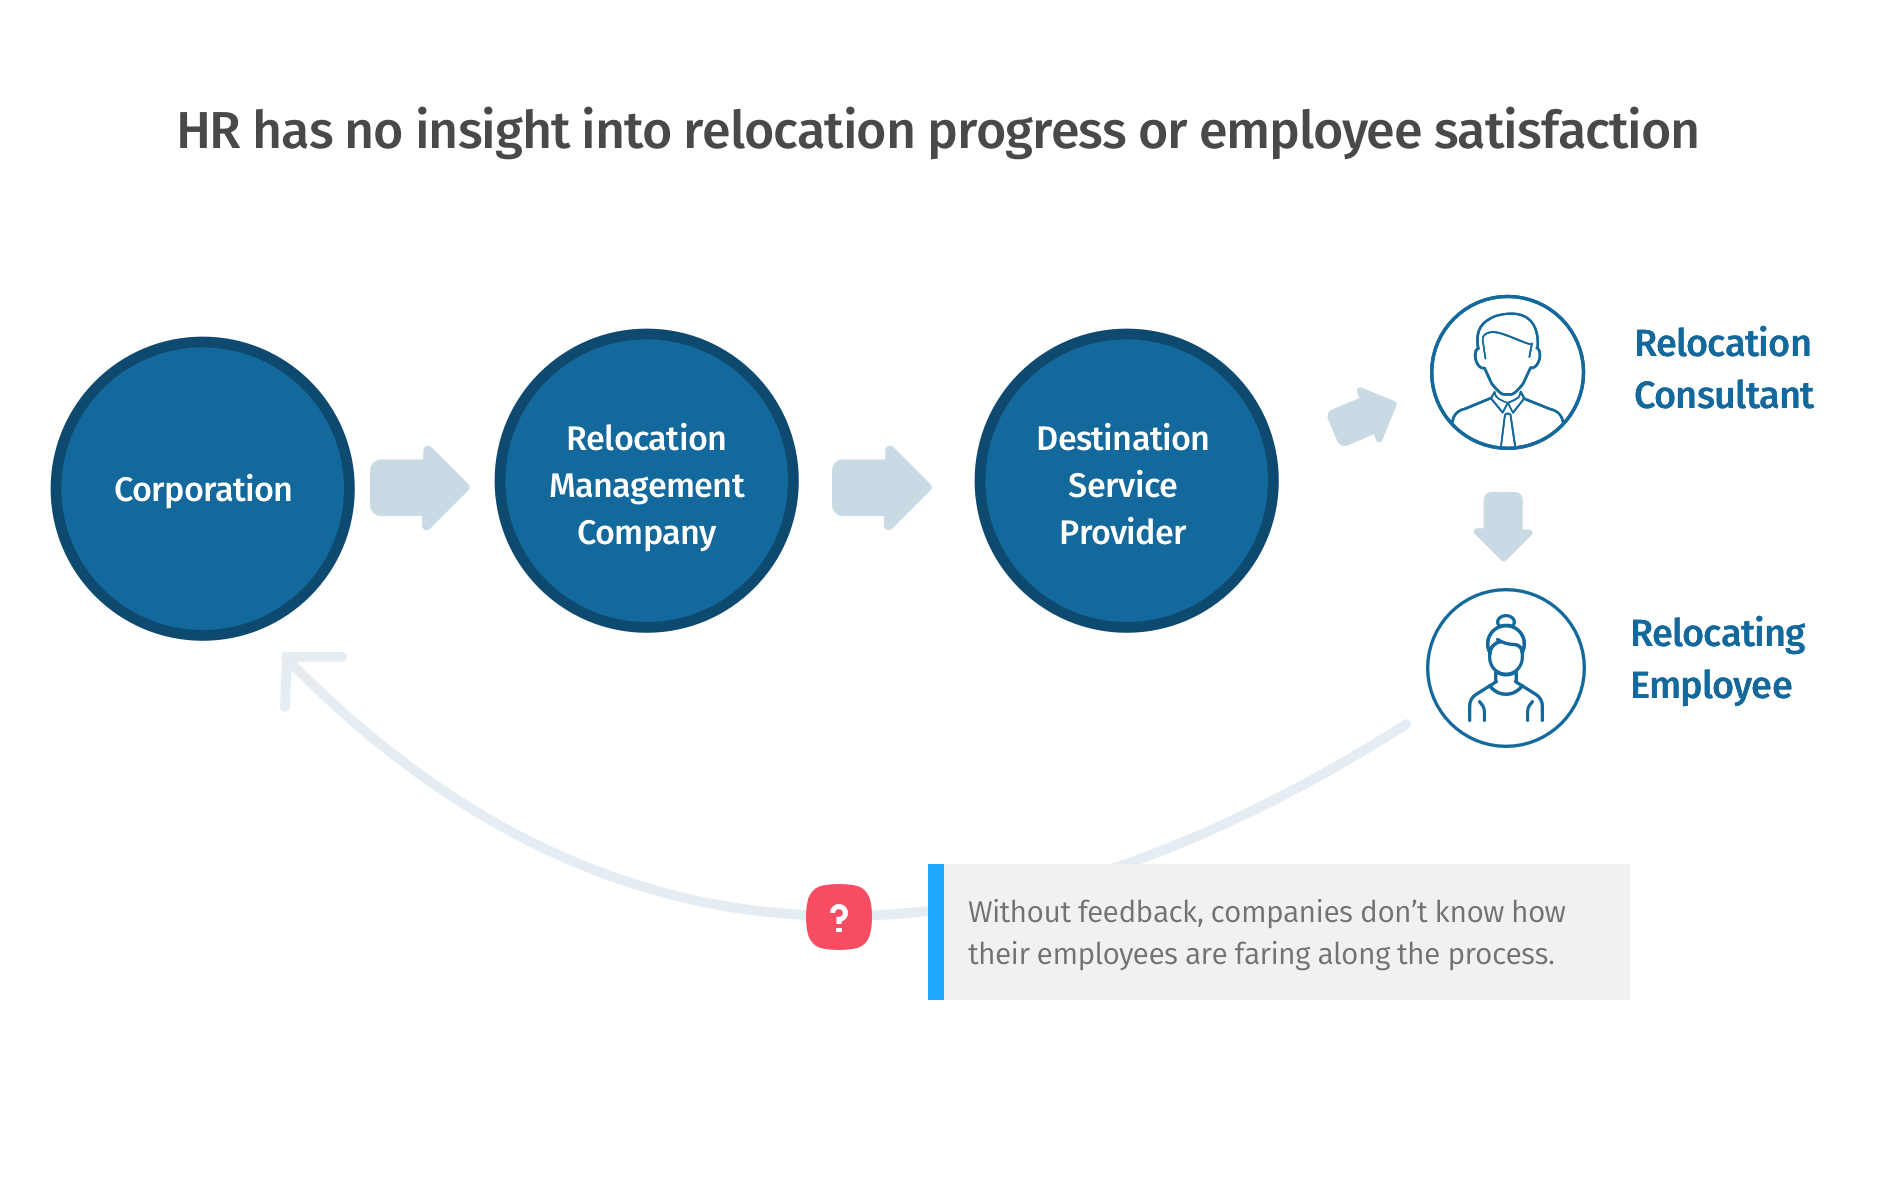 The Value chain of relocating employees